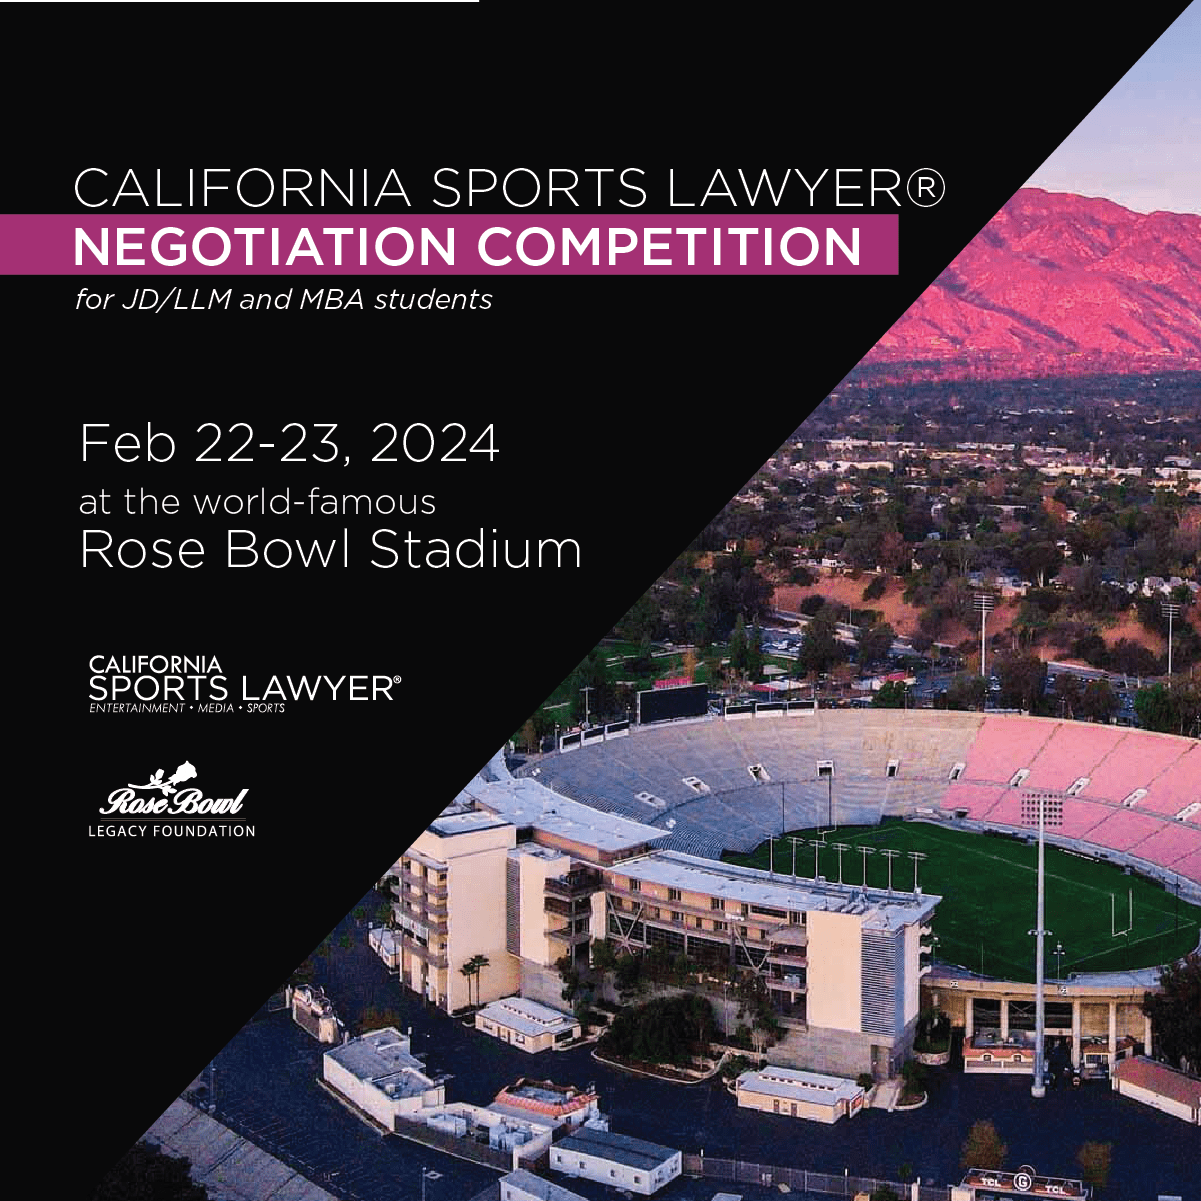 California Sports Lawyer® Negotiation Competition at the Rose Bowl Stadium (February 22-23, 2024) (2nd Annual)